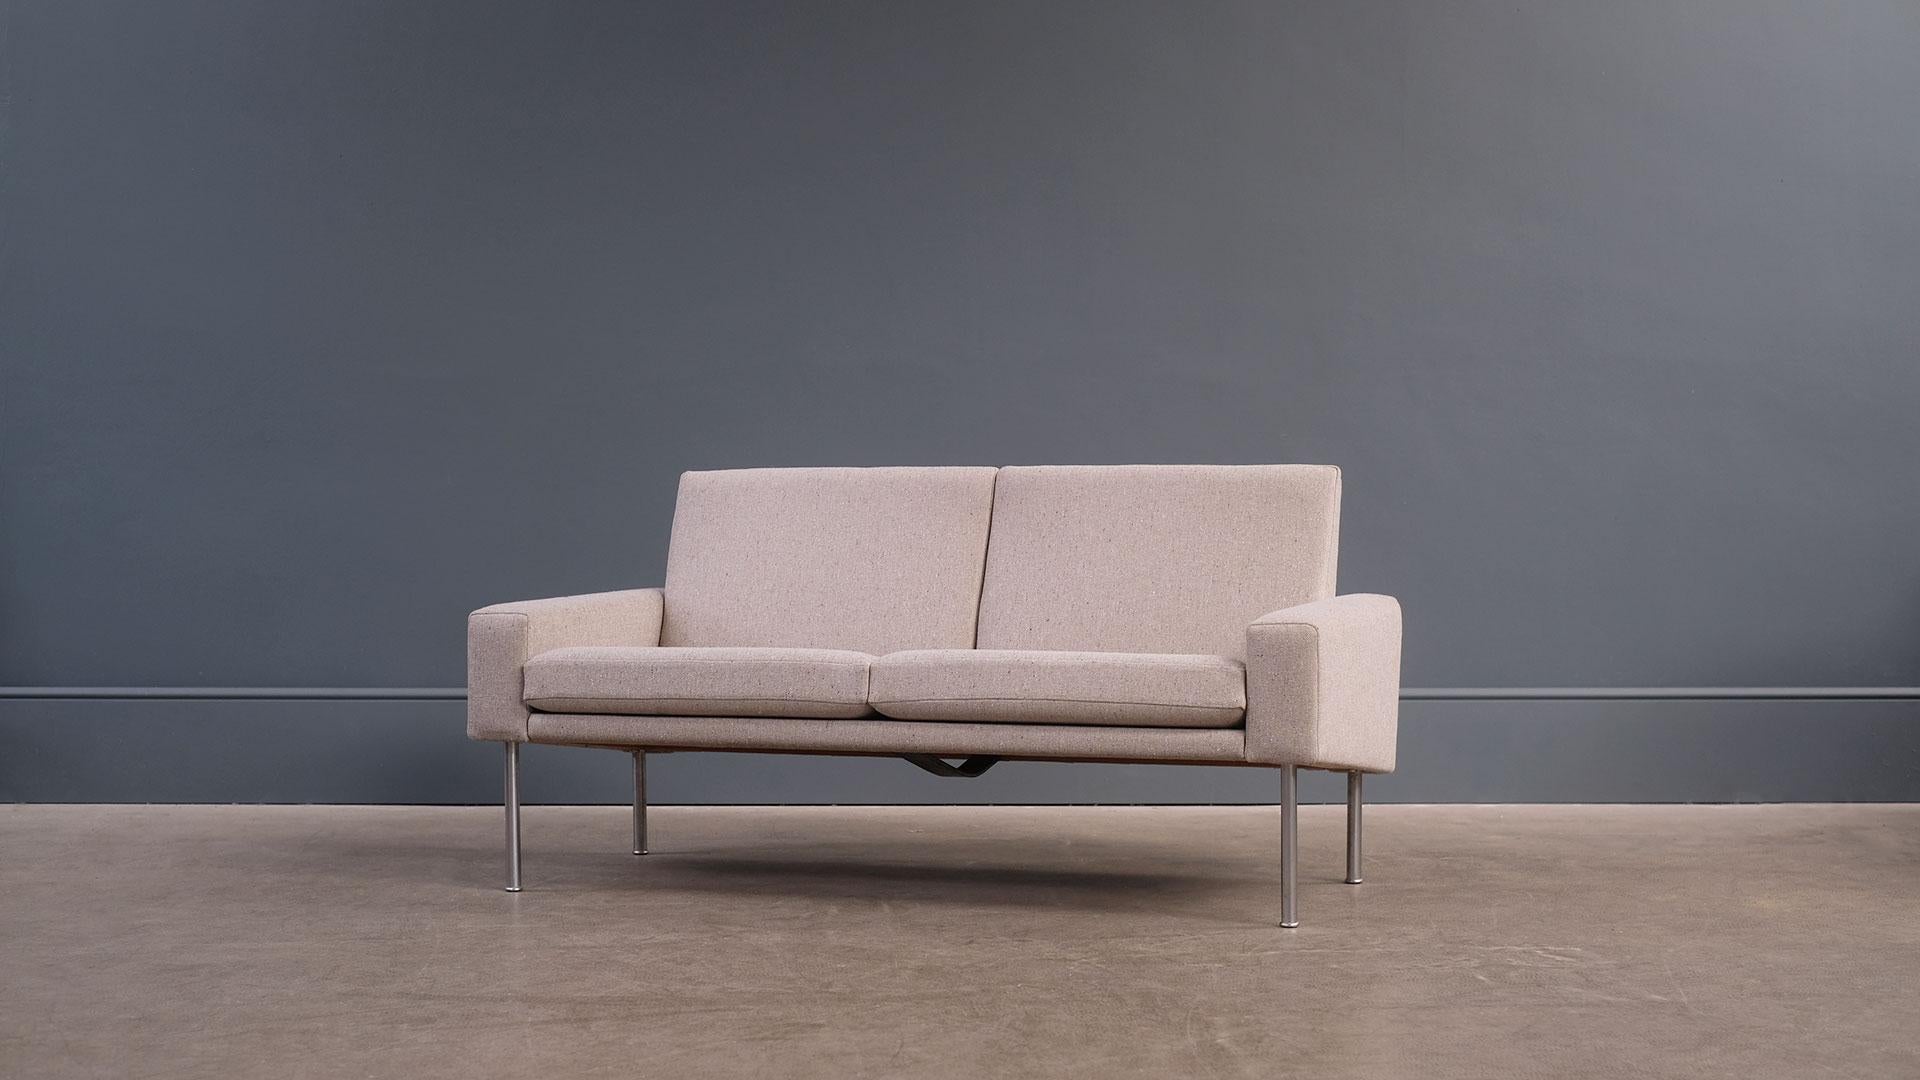 Fantastic model AP34 sofa designed by Hans Wegner for cabinetmaker A P Stolen, Denmark. Great looking and comfortable, fully reconditioned and reupholstered in fleck fabric.